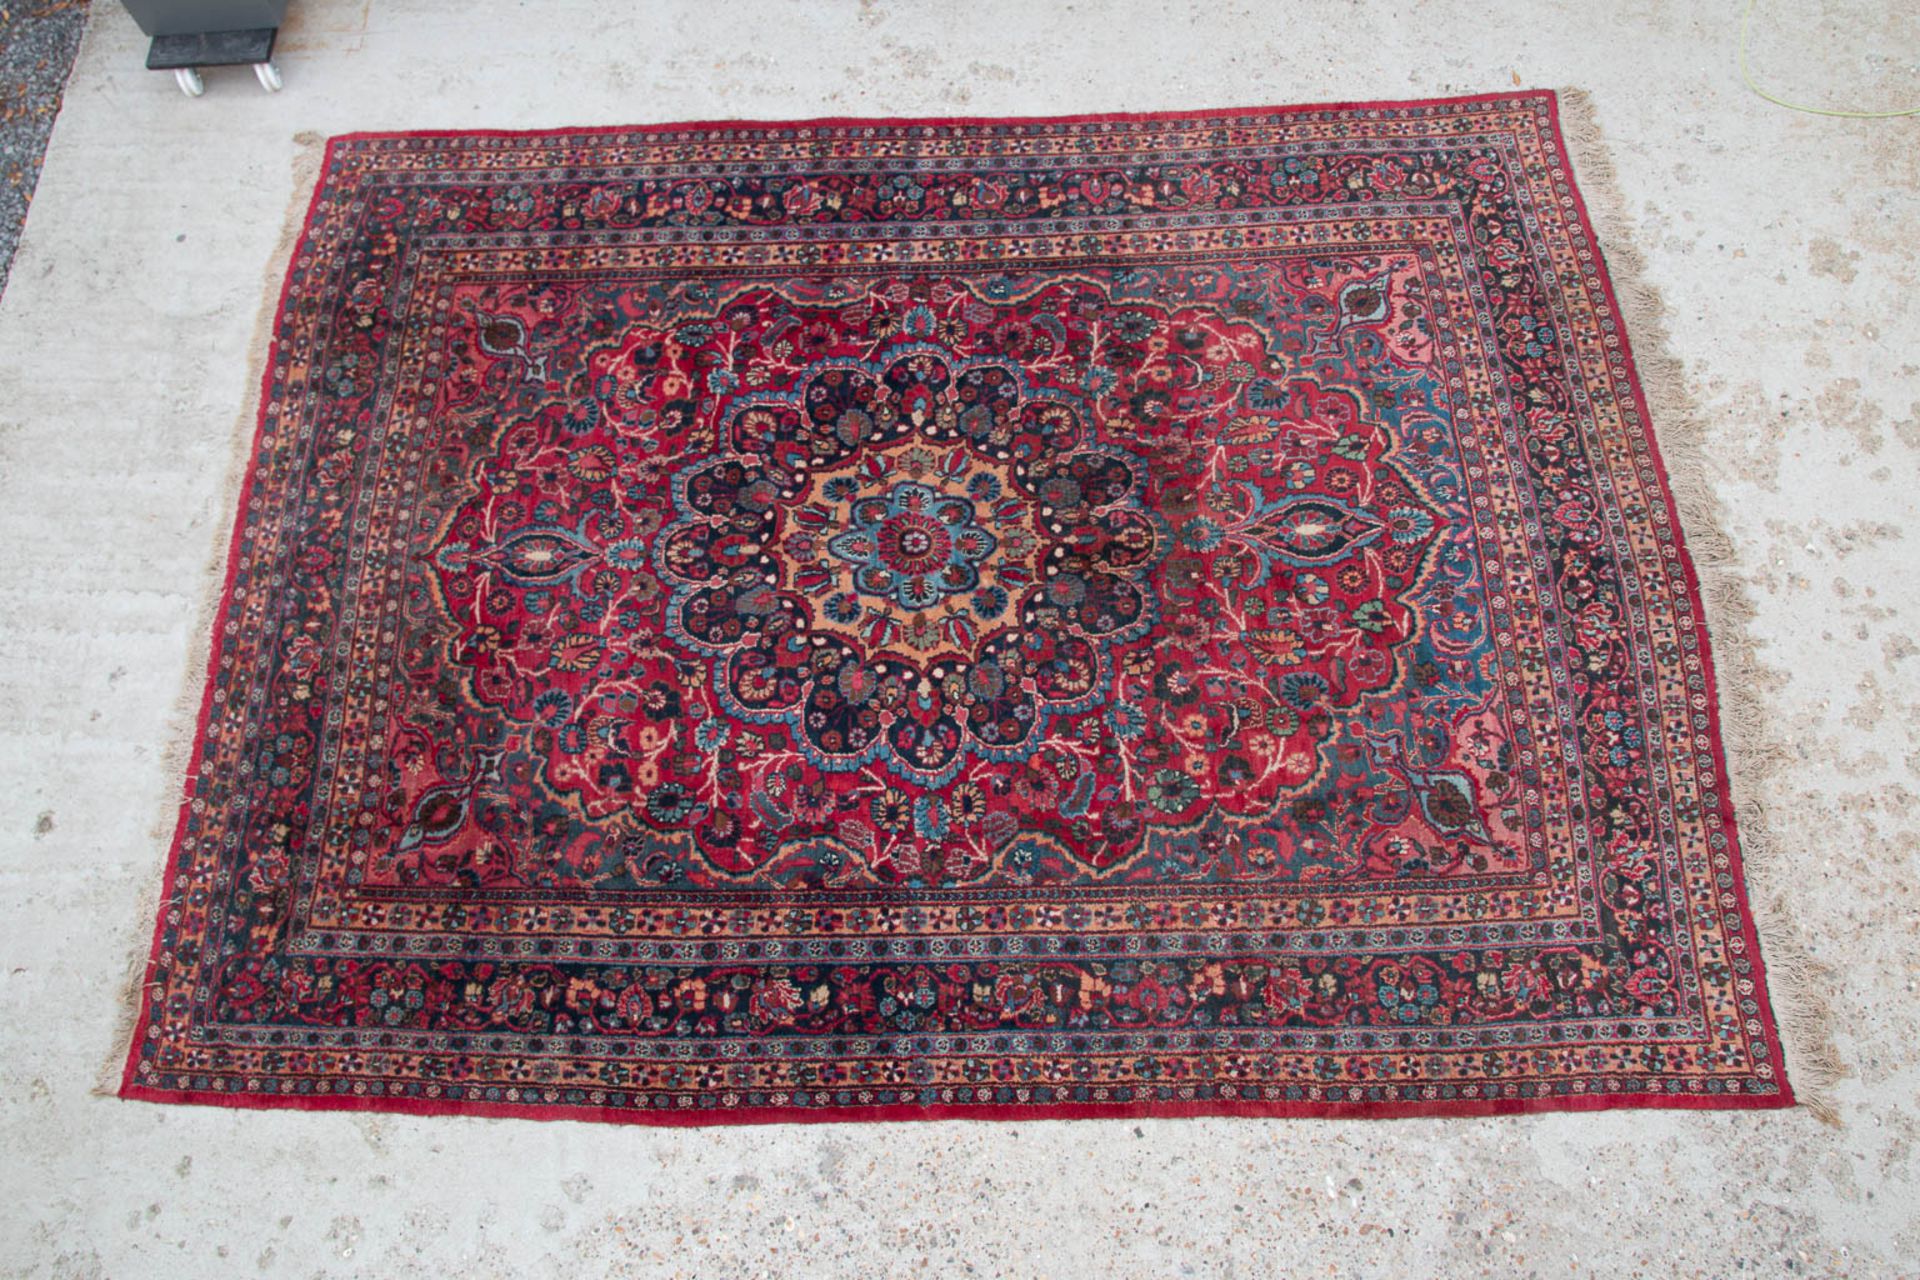 An Oriental hand-made carpet. Meshed. (342 x 255 cm)